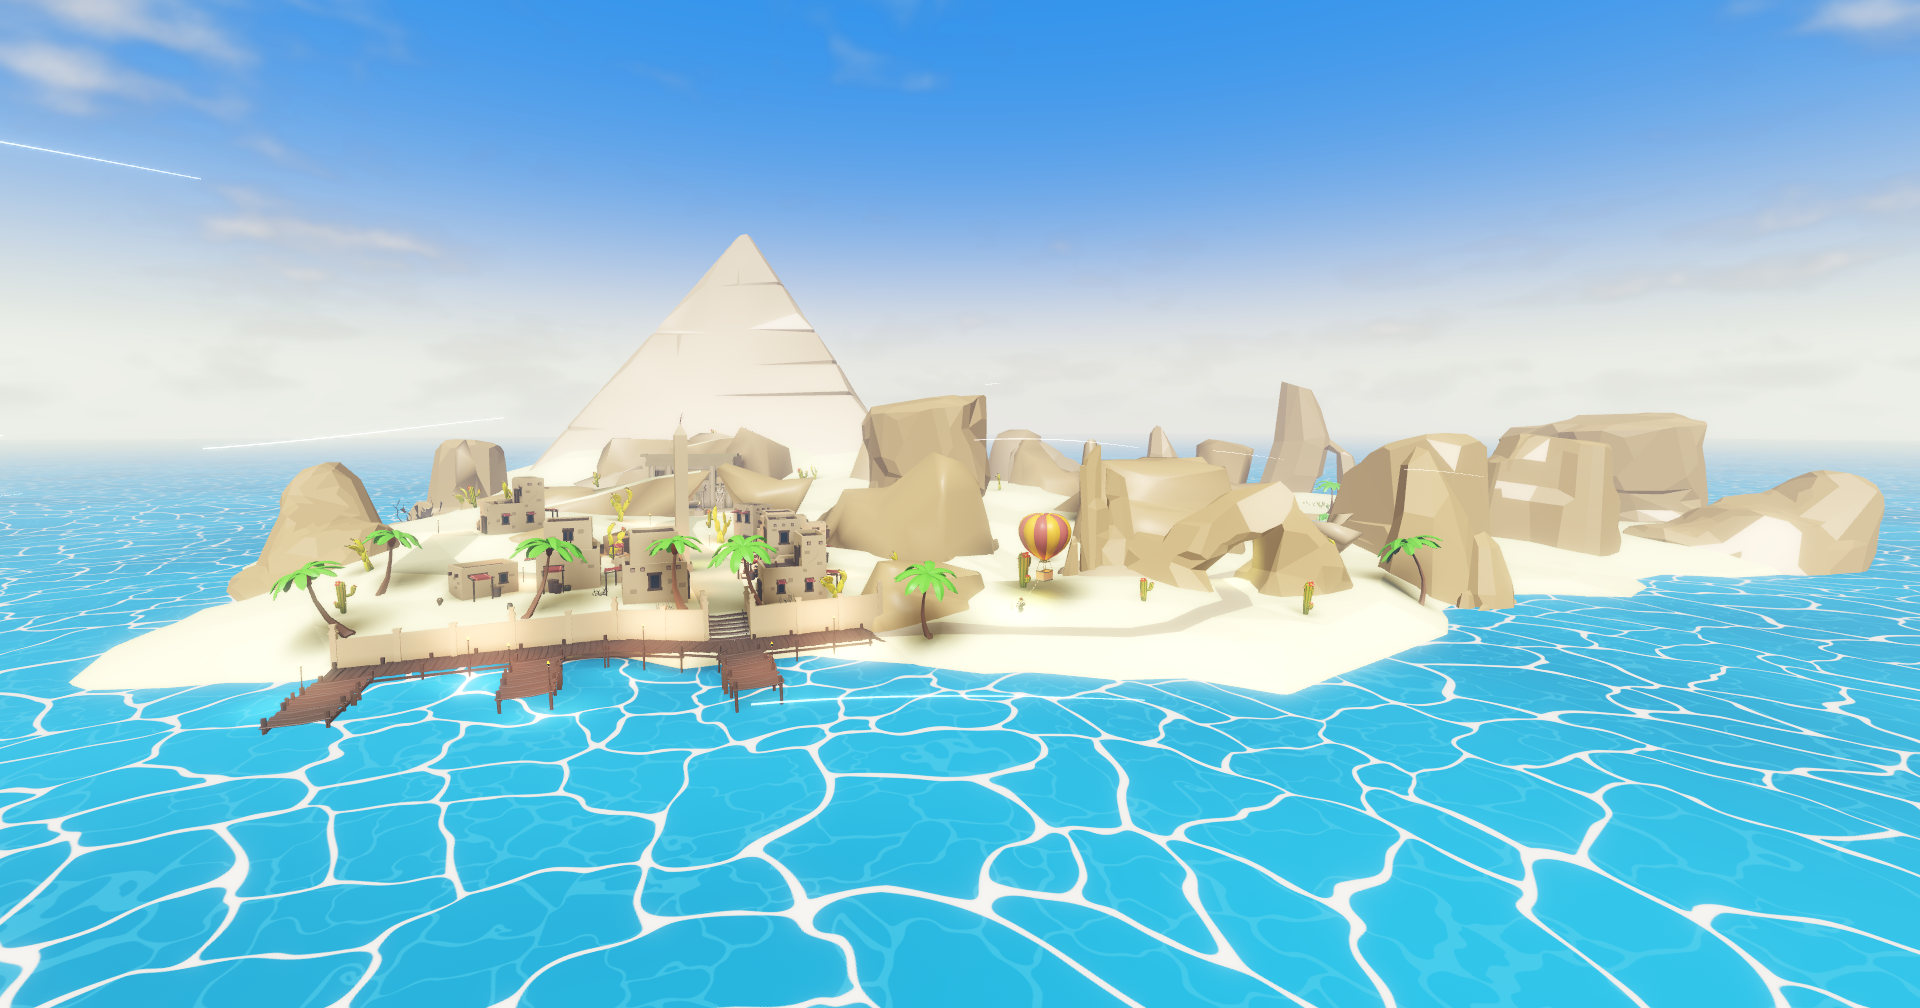 https://static.wikia.nocookie.net/fishingsimulator/images/9/9f/Pharaoh%27s_Dunes_2.png/revision/latest?cb=20230312045037